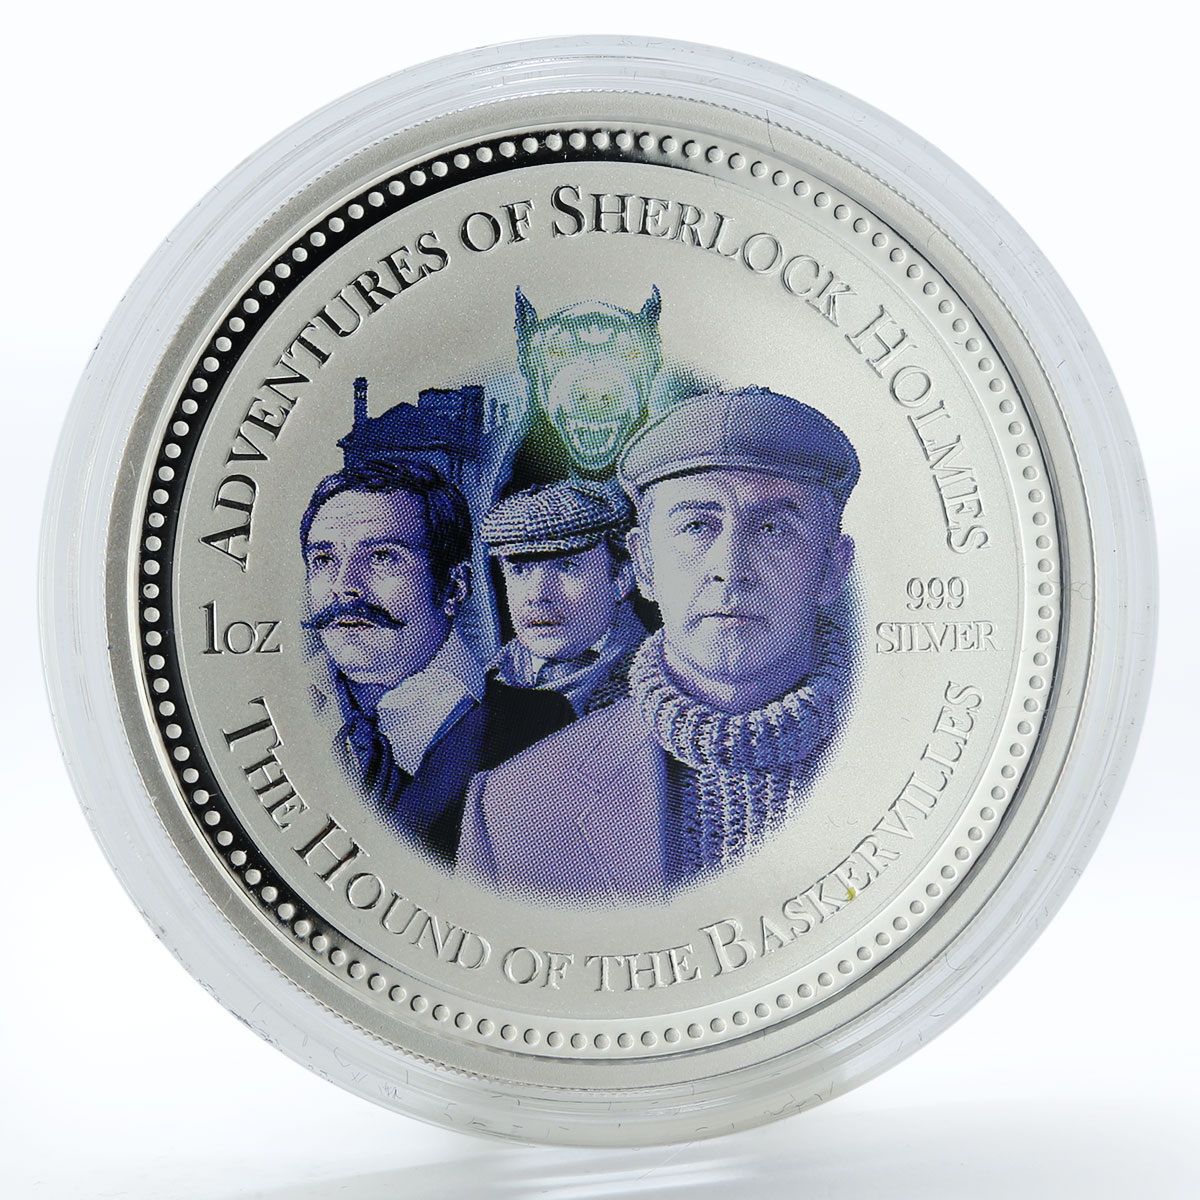 Cook Islands set 4 coins Sherlock Holmes colored silver 2007